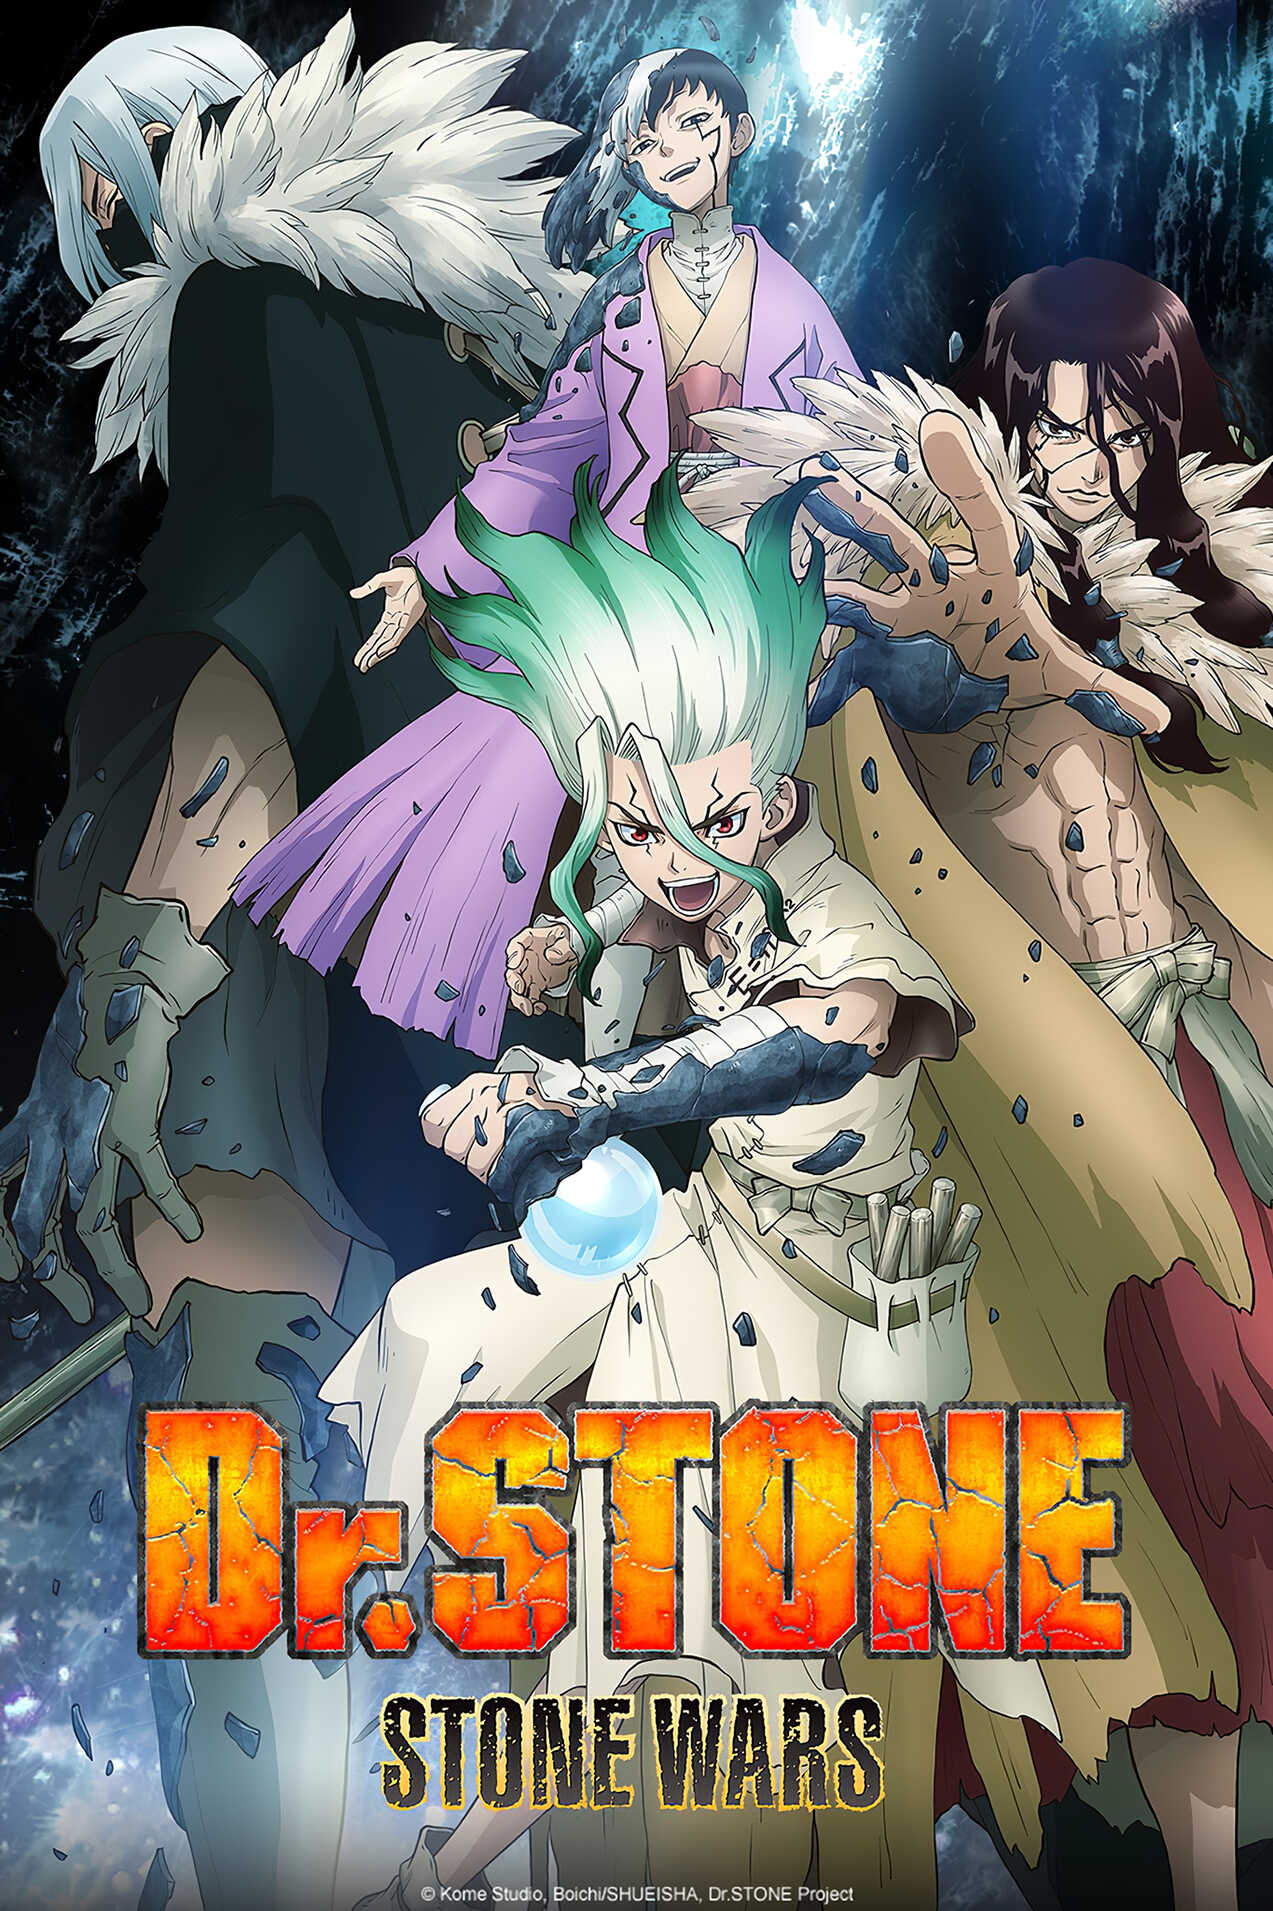 REVIEW Dr STONE Ryusui Brings Back the Spark